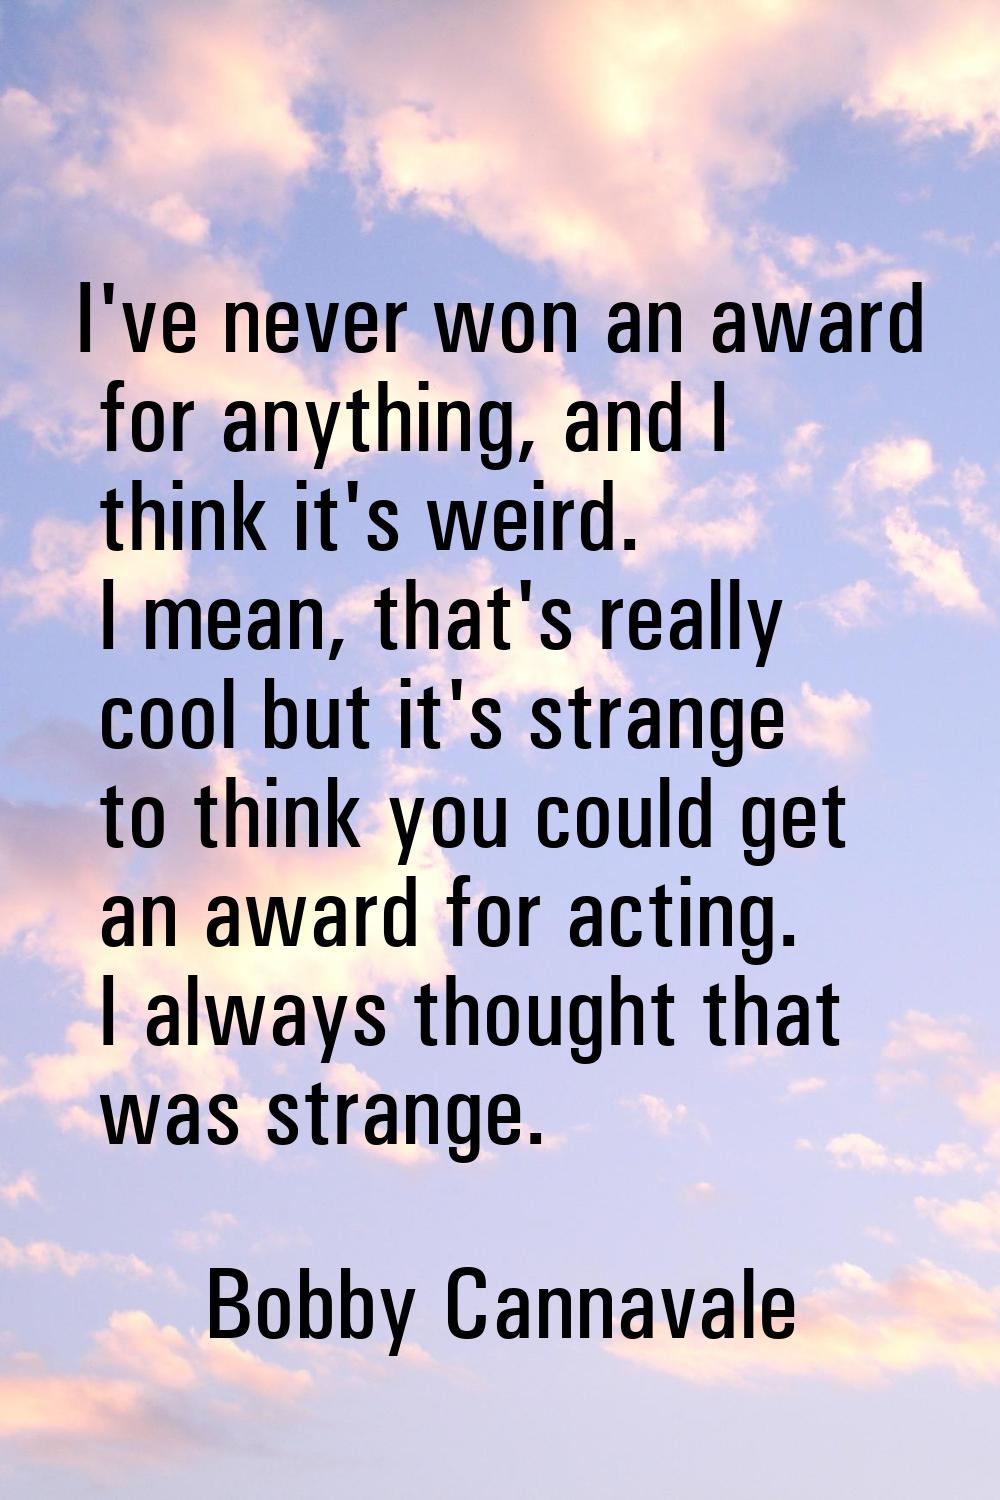 I've never won an award for anything, and I think it's weird. I mean, that's really cool but it's s